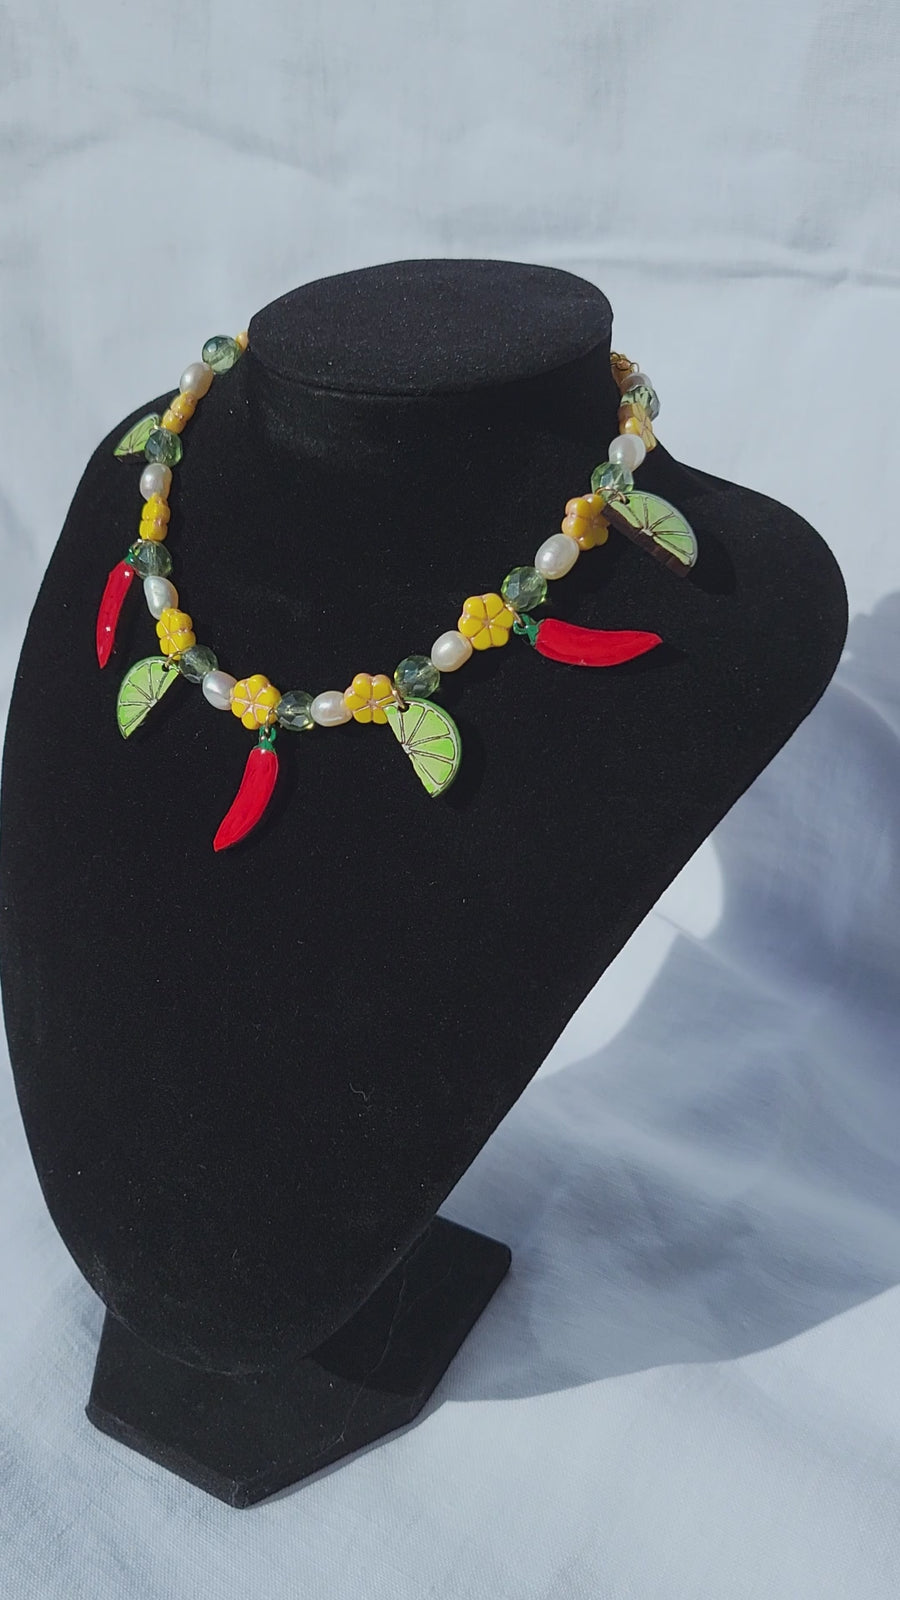 Chili Lime Charm Necklace